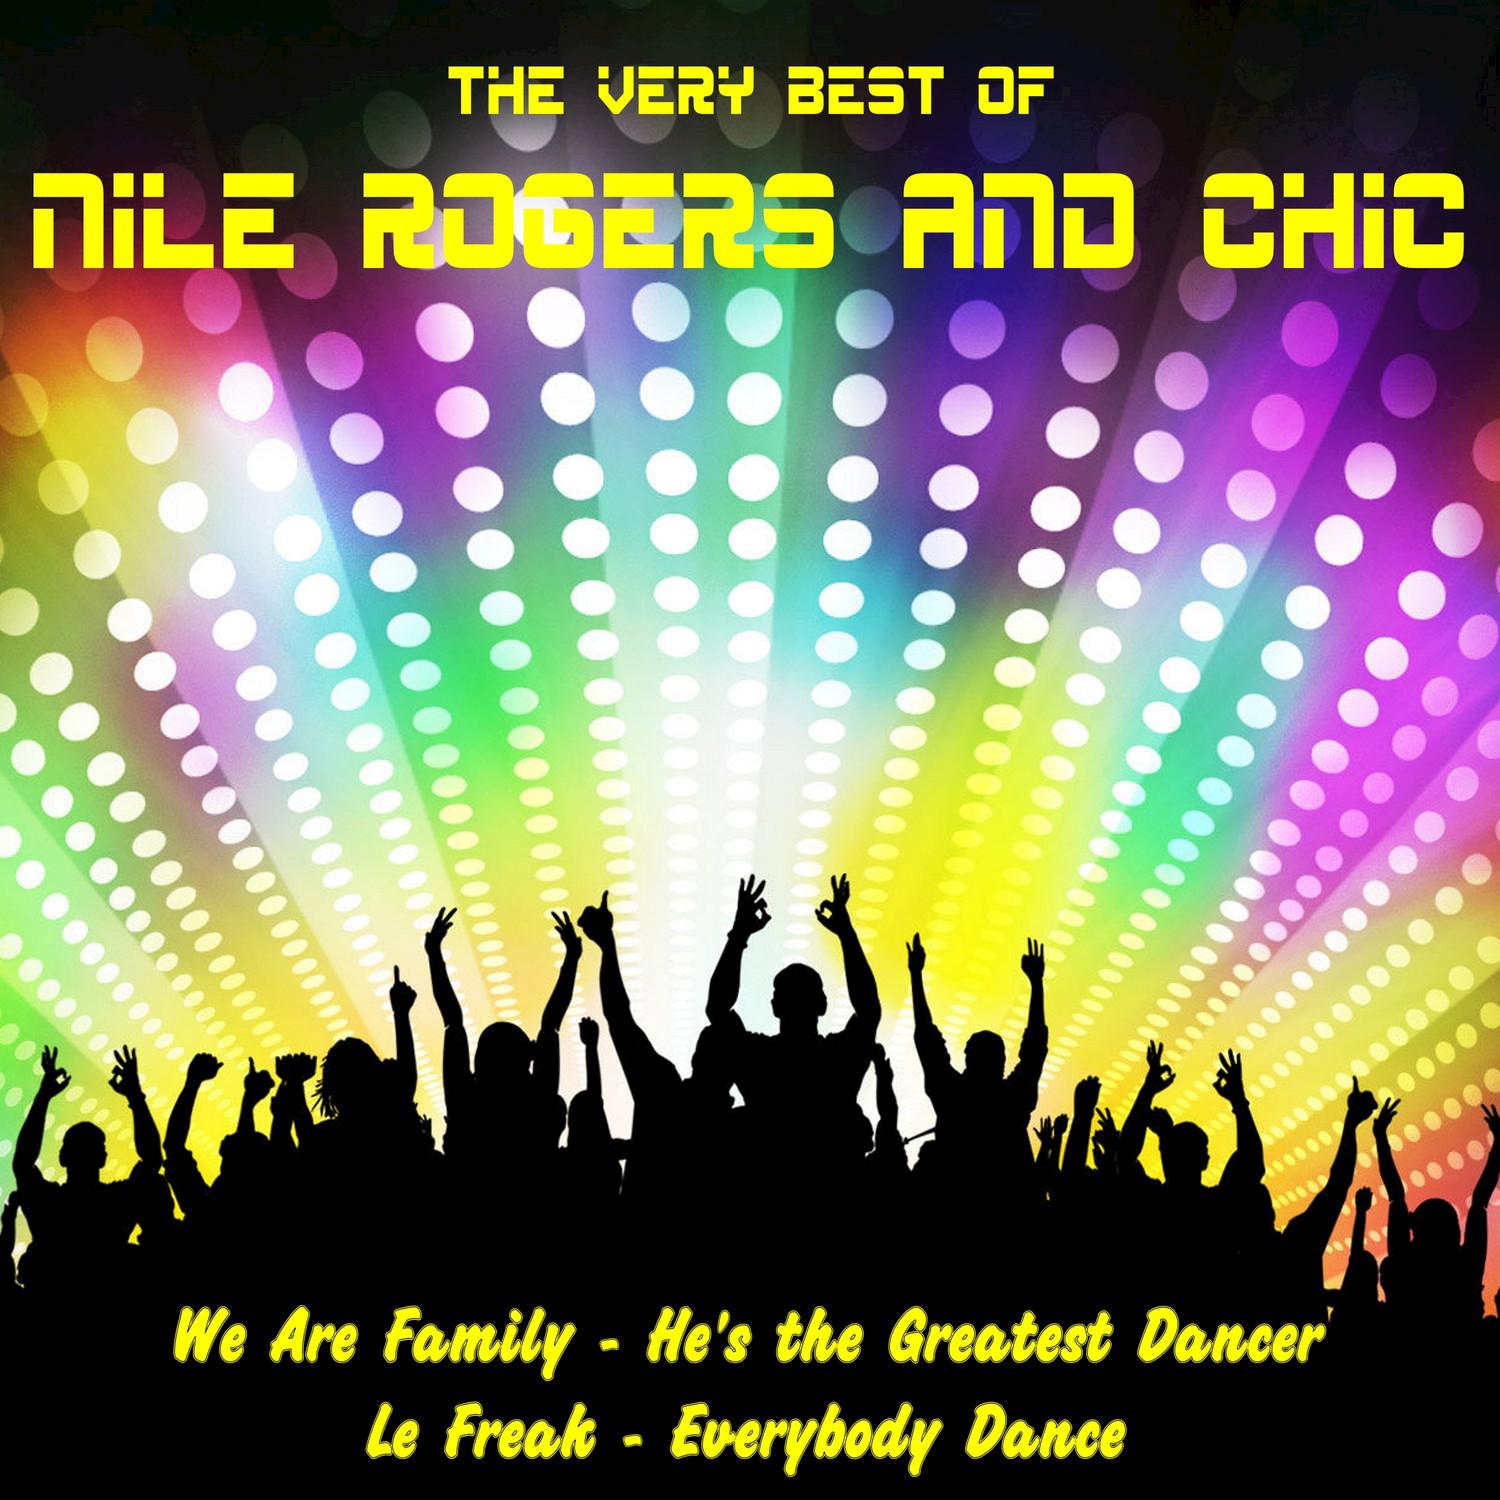 The Very Best of Nile Rogers and Chic (Live)